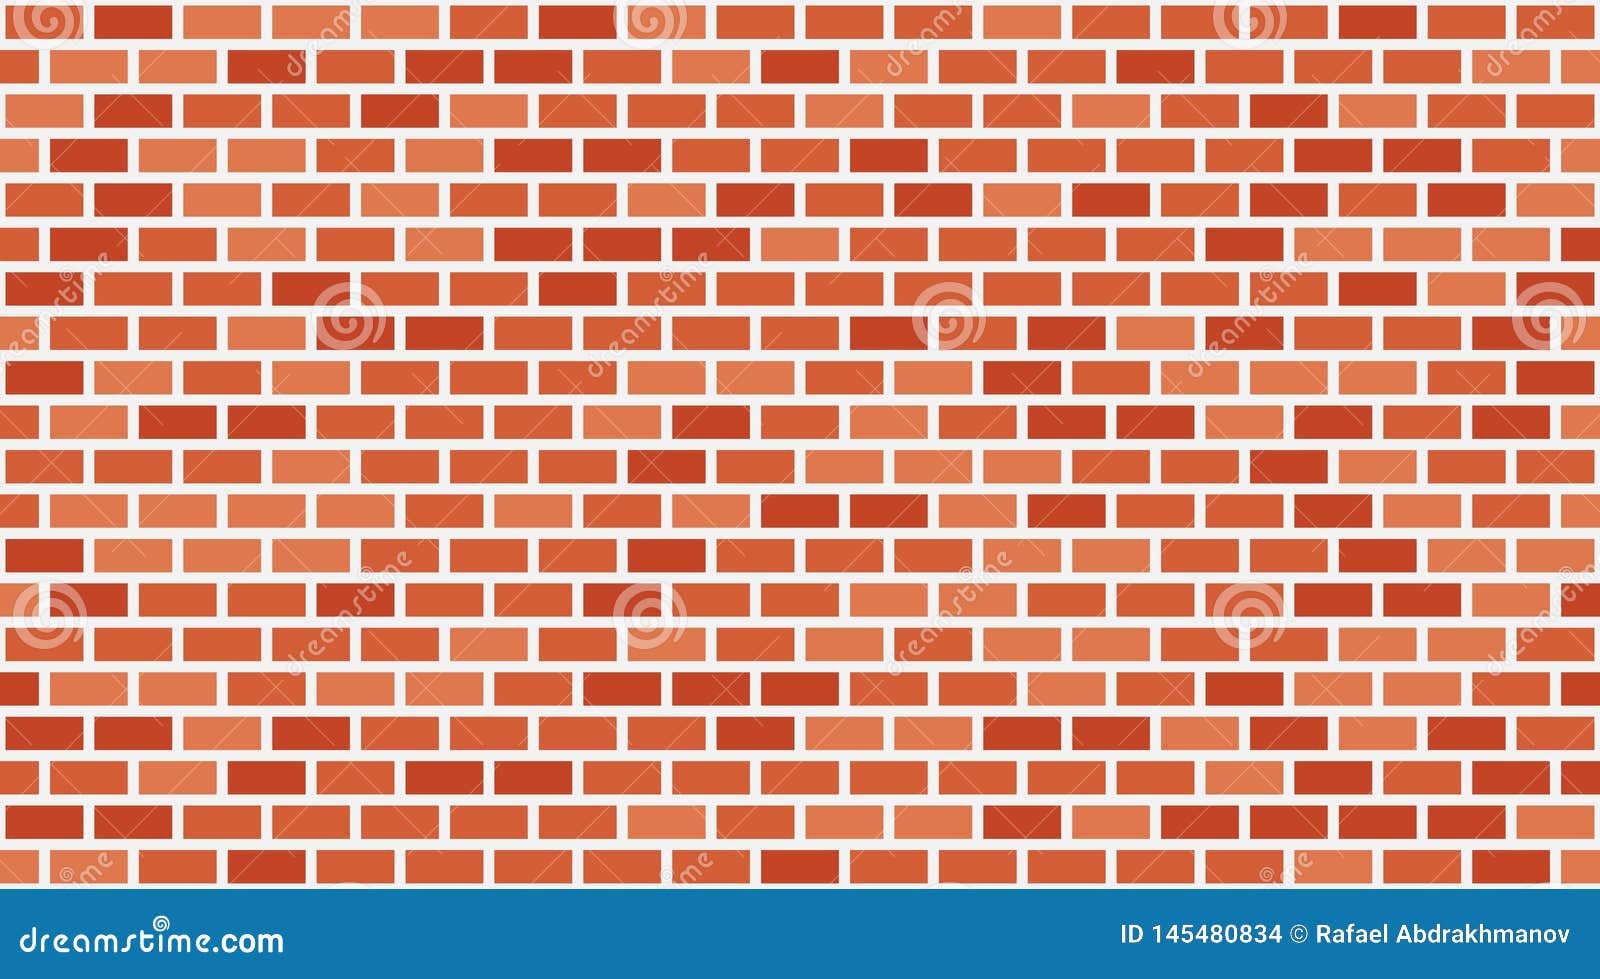 Vector Red Brick Wall Background. Old Texture Urban Masonry. Vintage  Architecture Block Wallpaper Stock Vector - Illustration of wallpaper,  indoor: 145480834